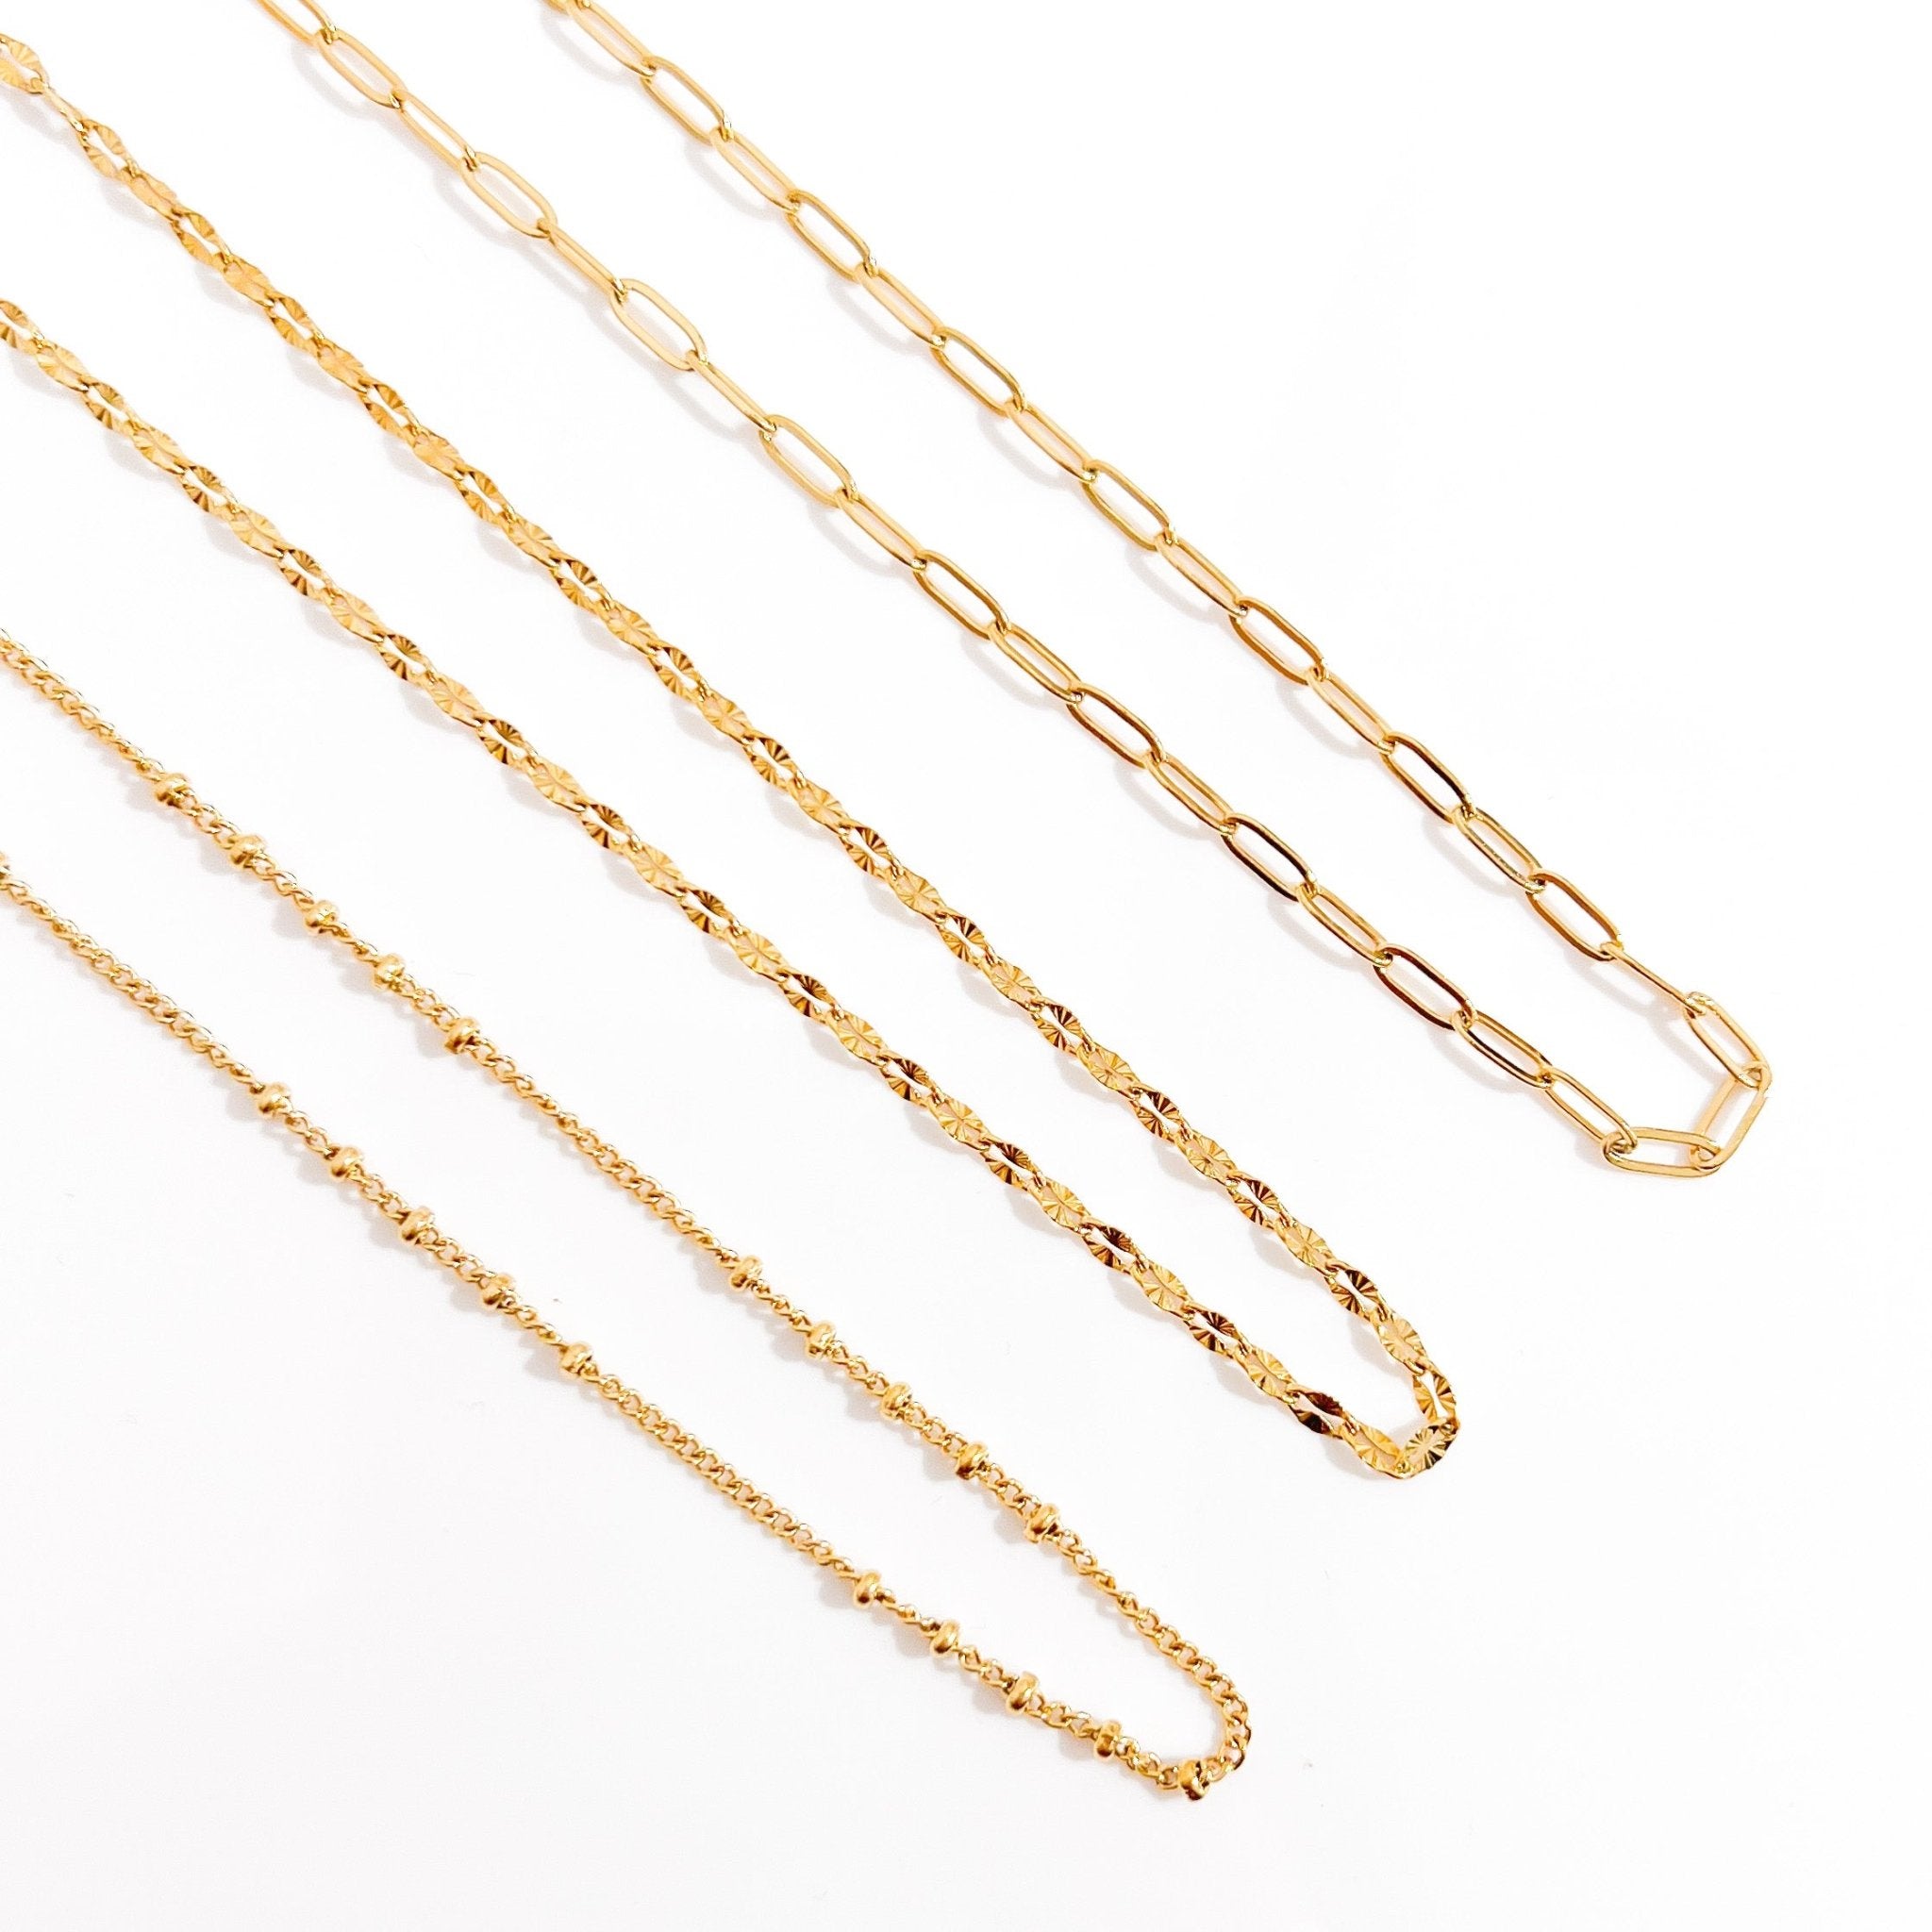 Gold Dainty Chains Bundle - Flaire & Co.